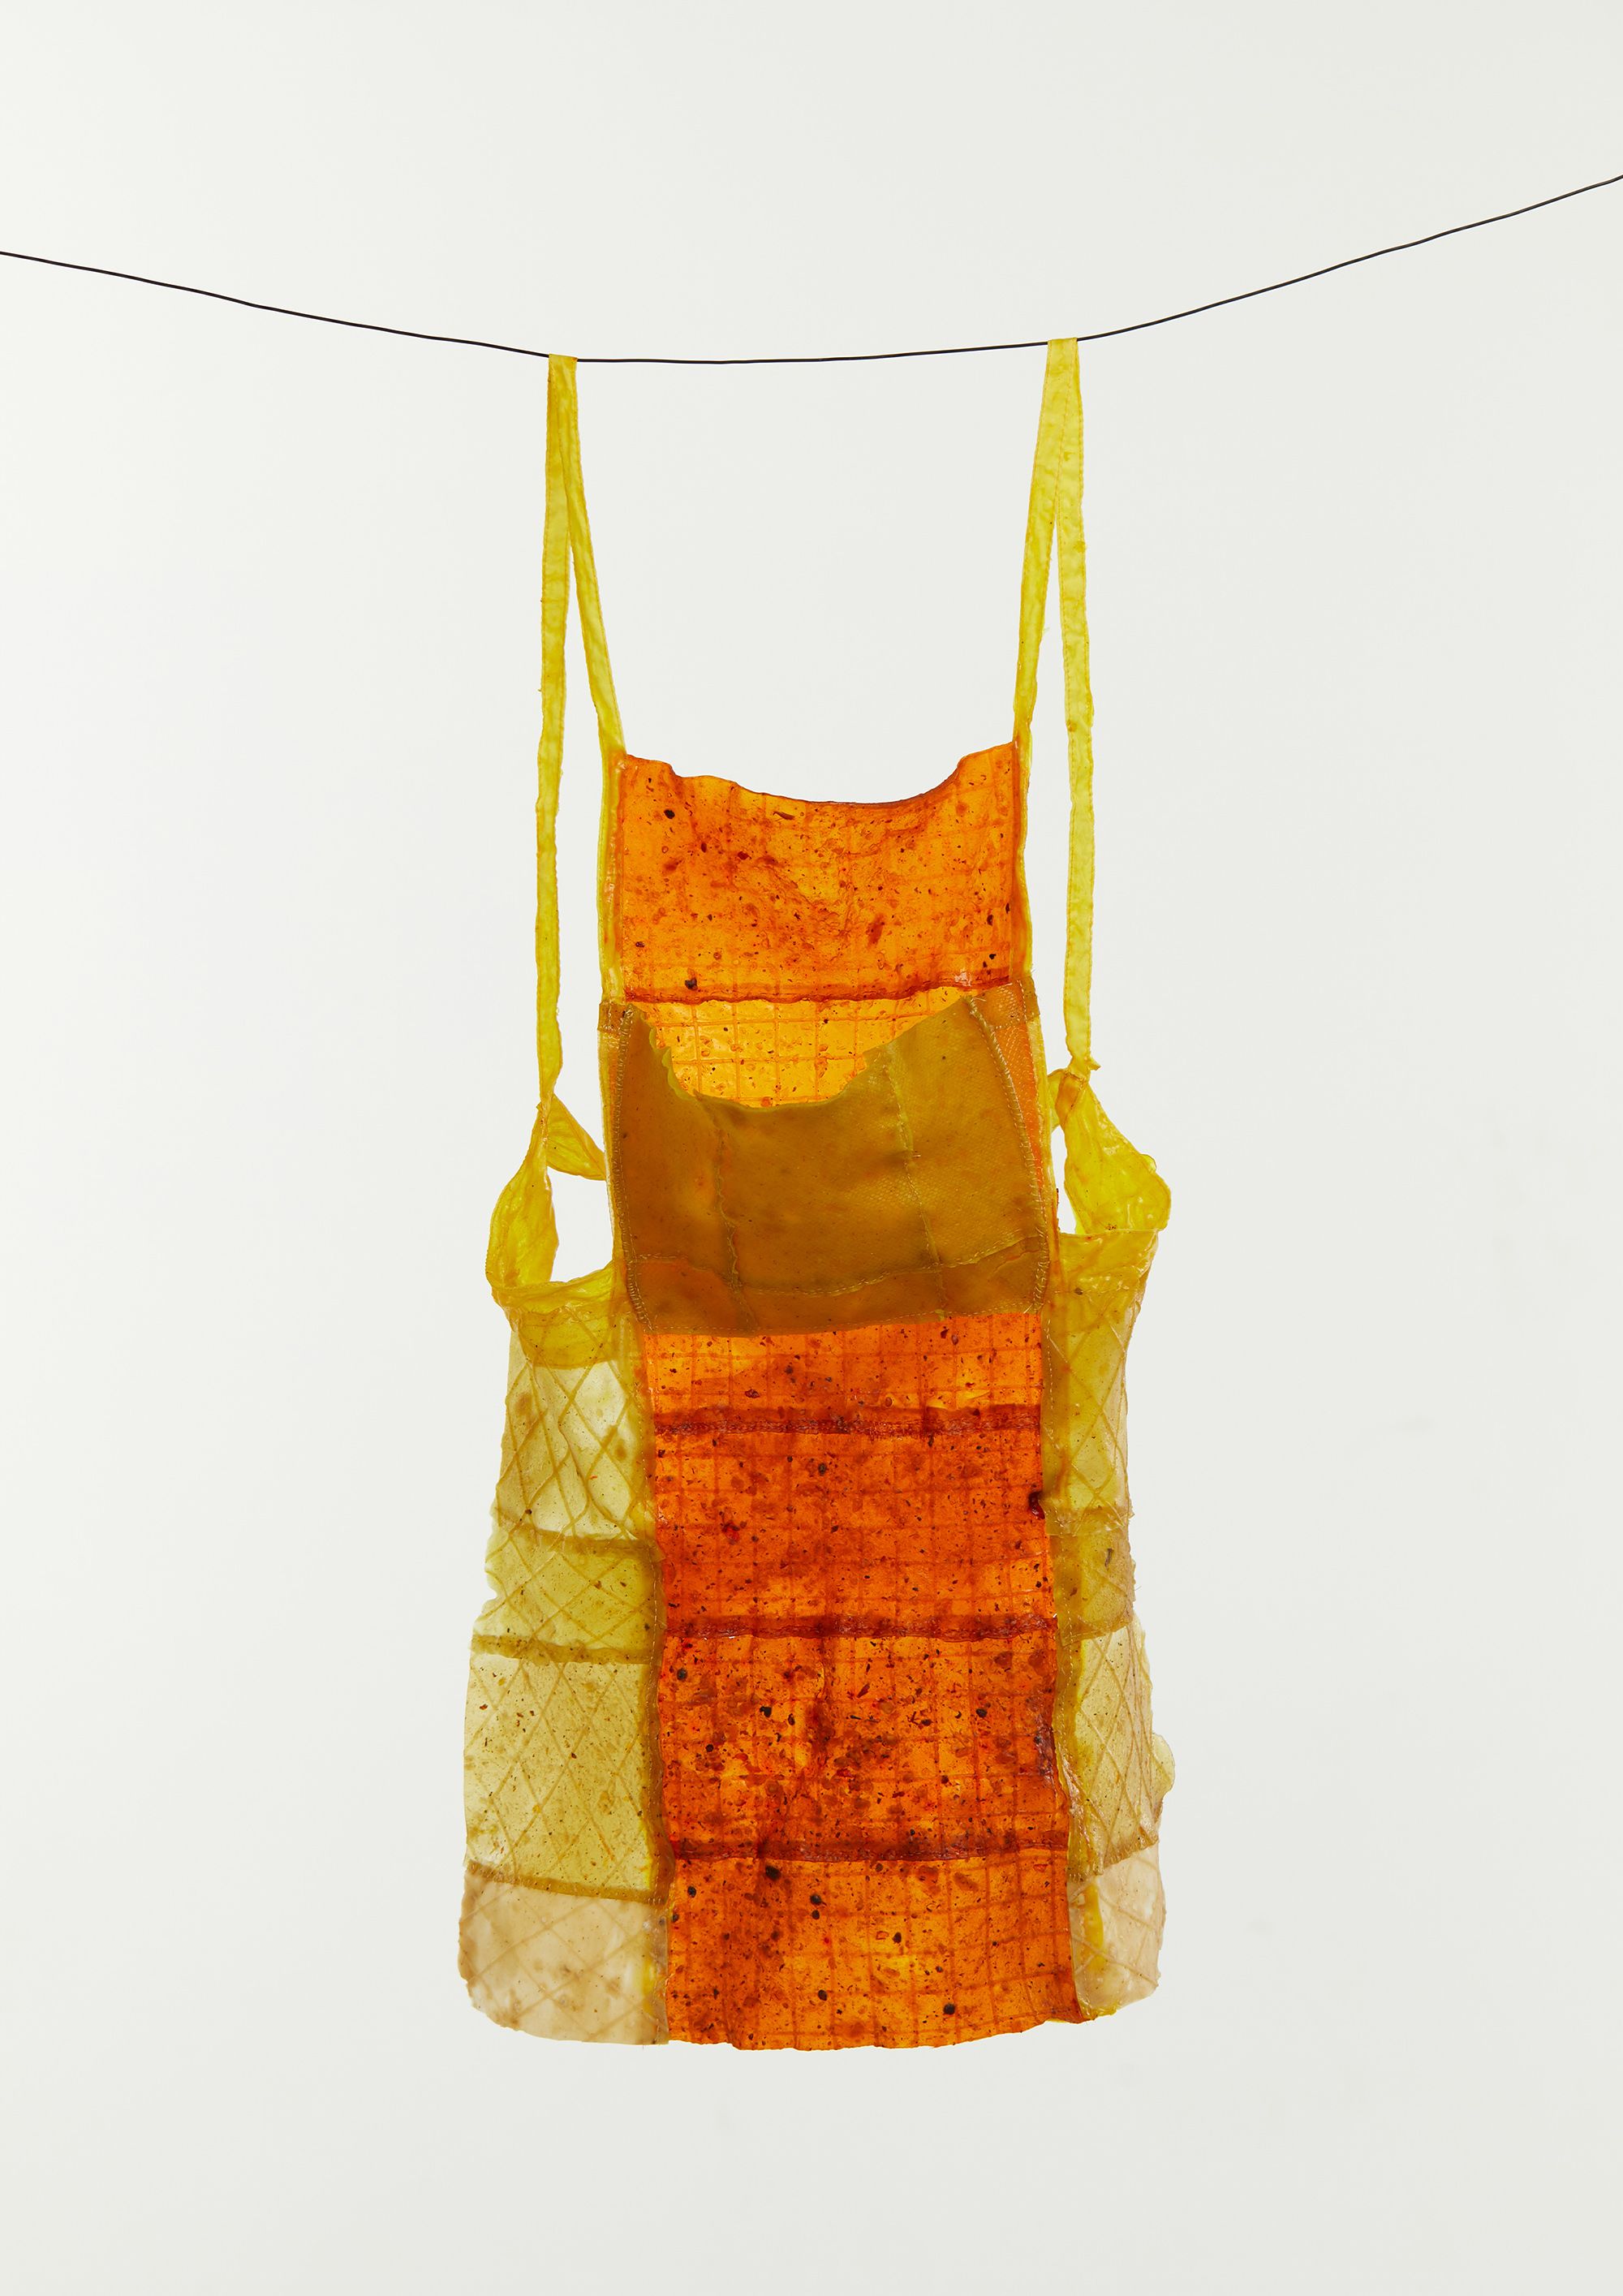 A dress garment from the FATWEAR collection, the dress is created from waste fat liquids which result in a yellow and orange material. The dress is hanging from a wire. 